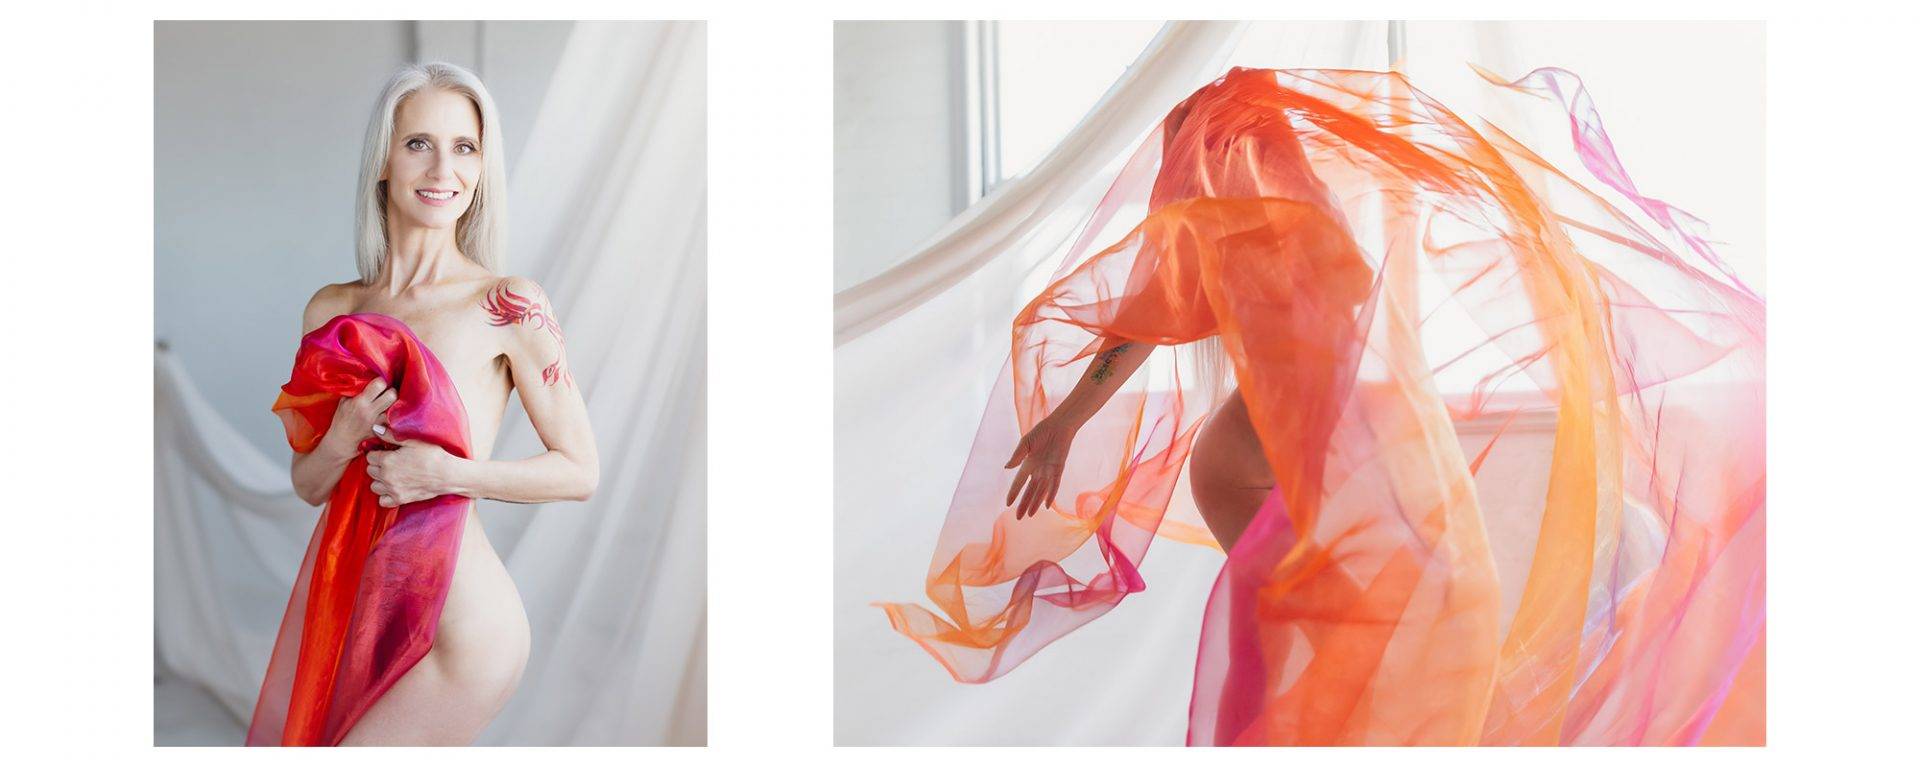 Art nudes of woman dancing with orange fabric